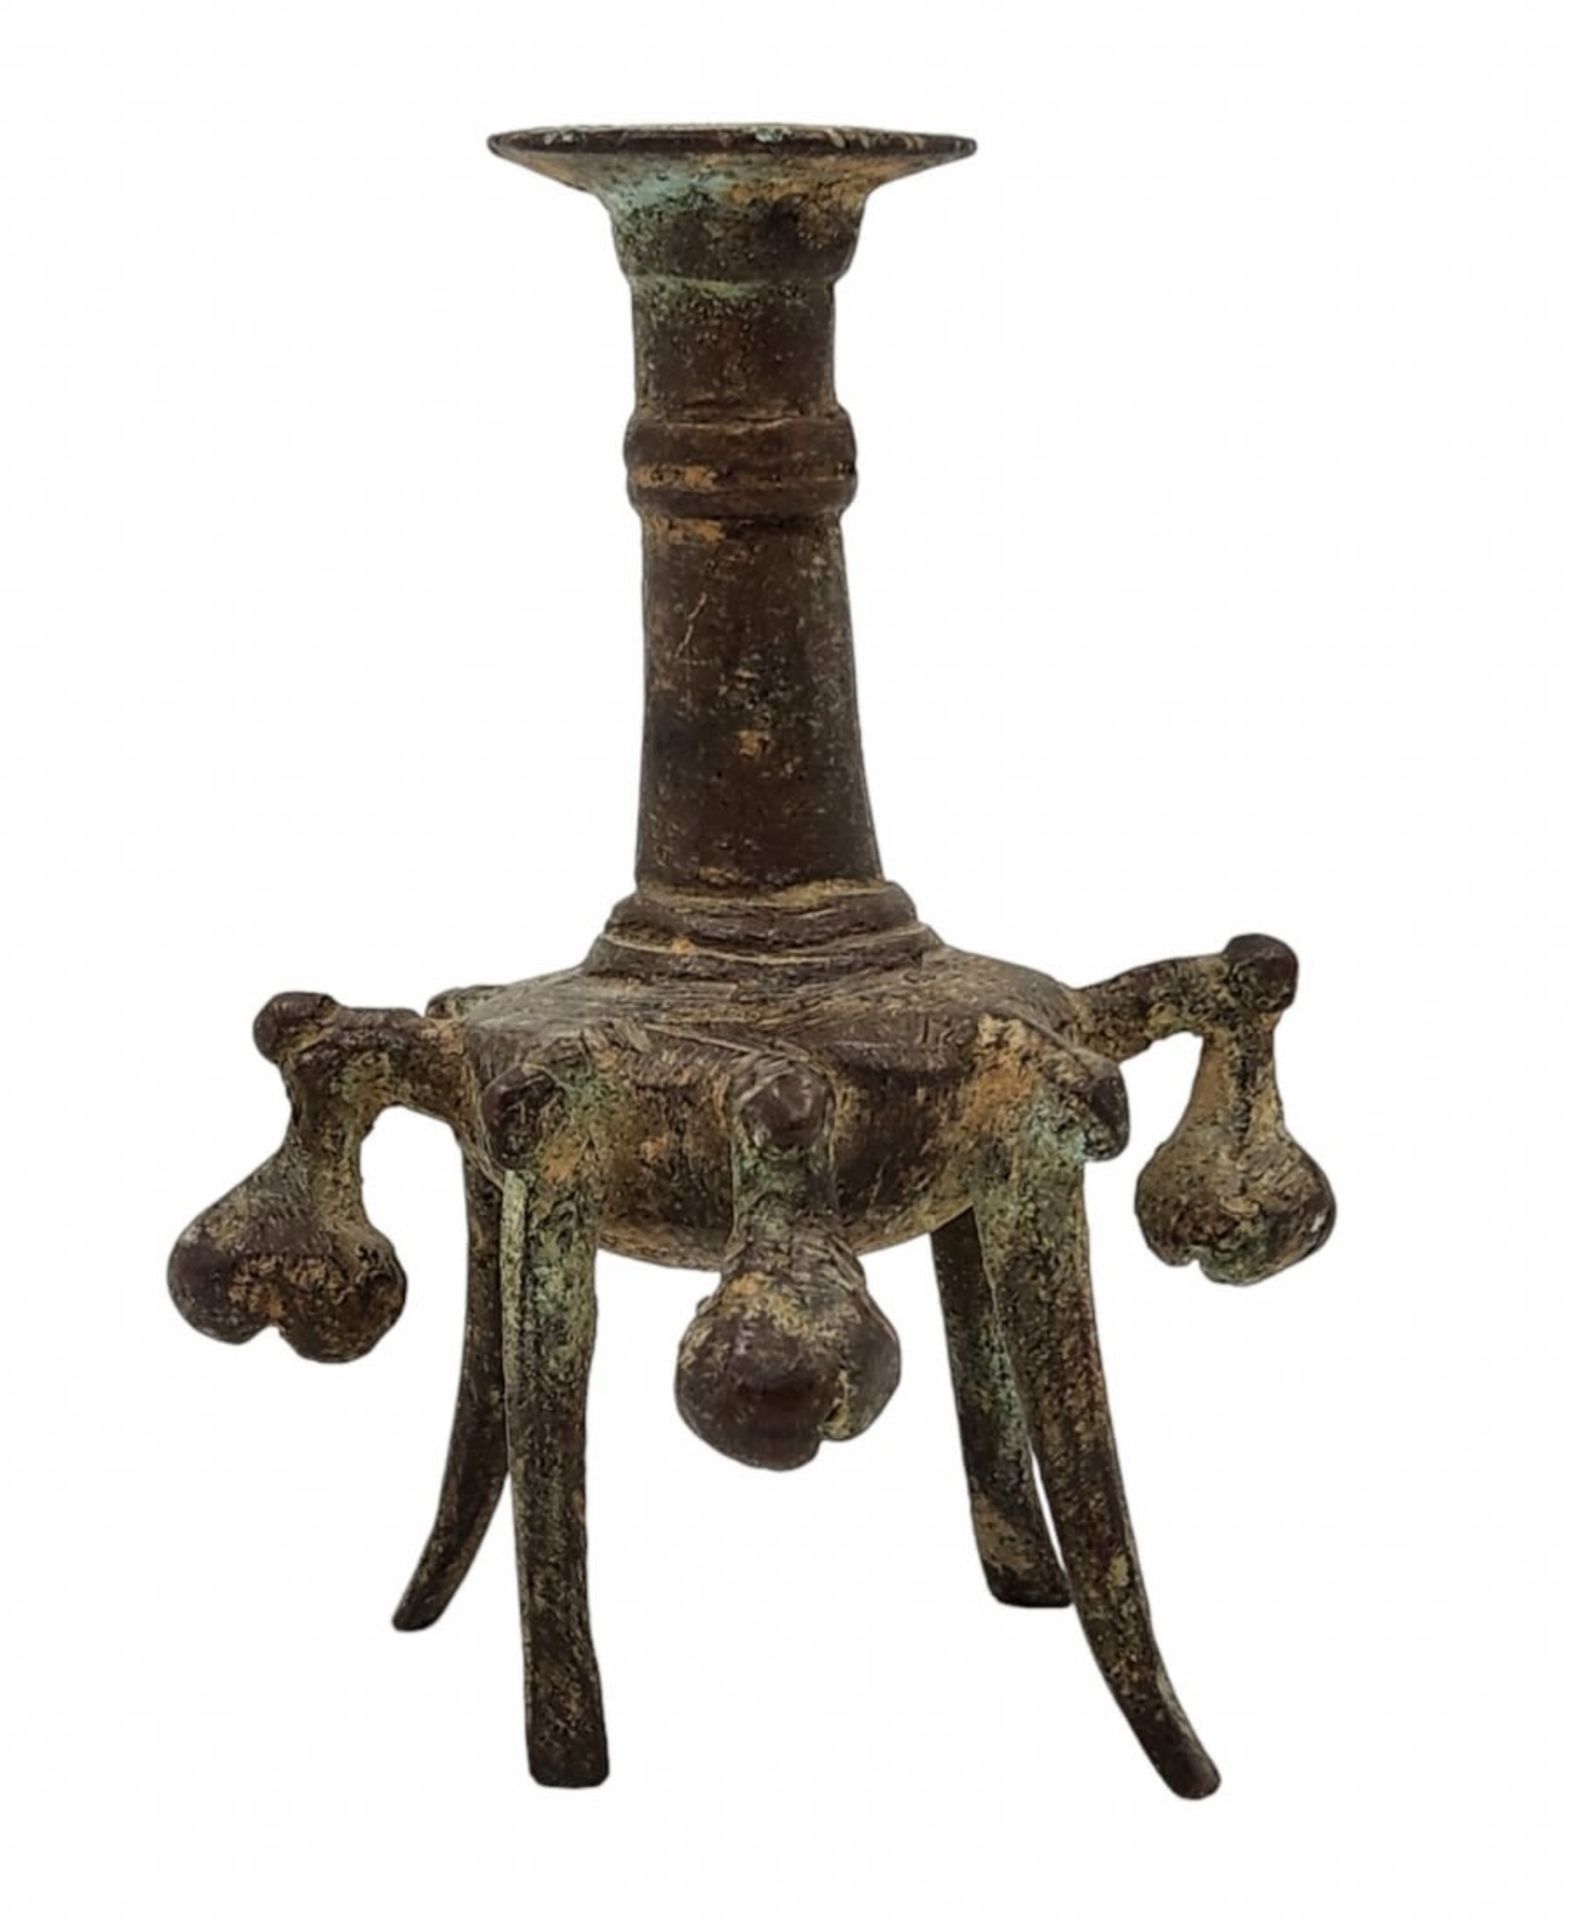 An antique Indian vessel for cosmetics, made of bronze, 18th century, Height: 14 cm, Width: 10 cm. - Image 3 of 5